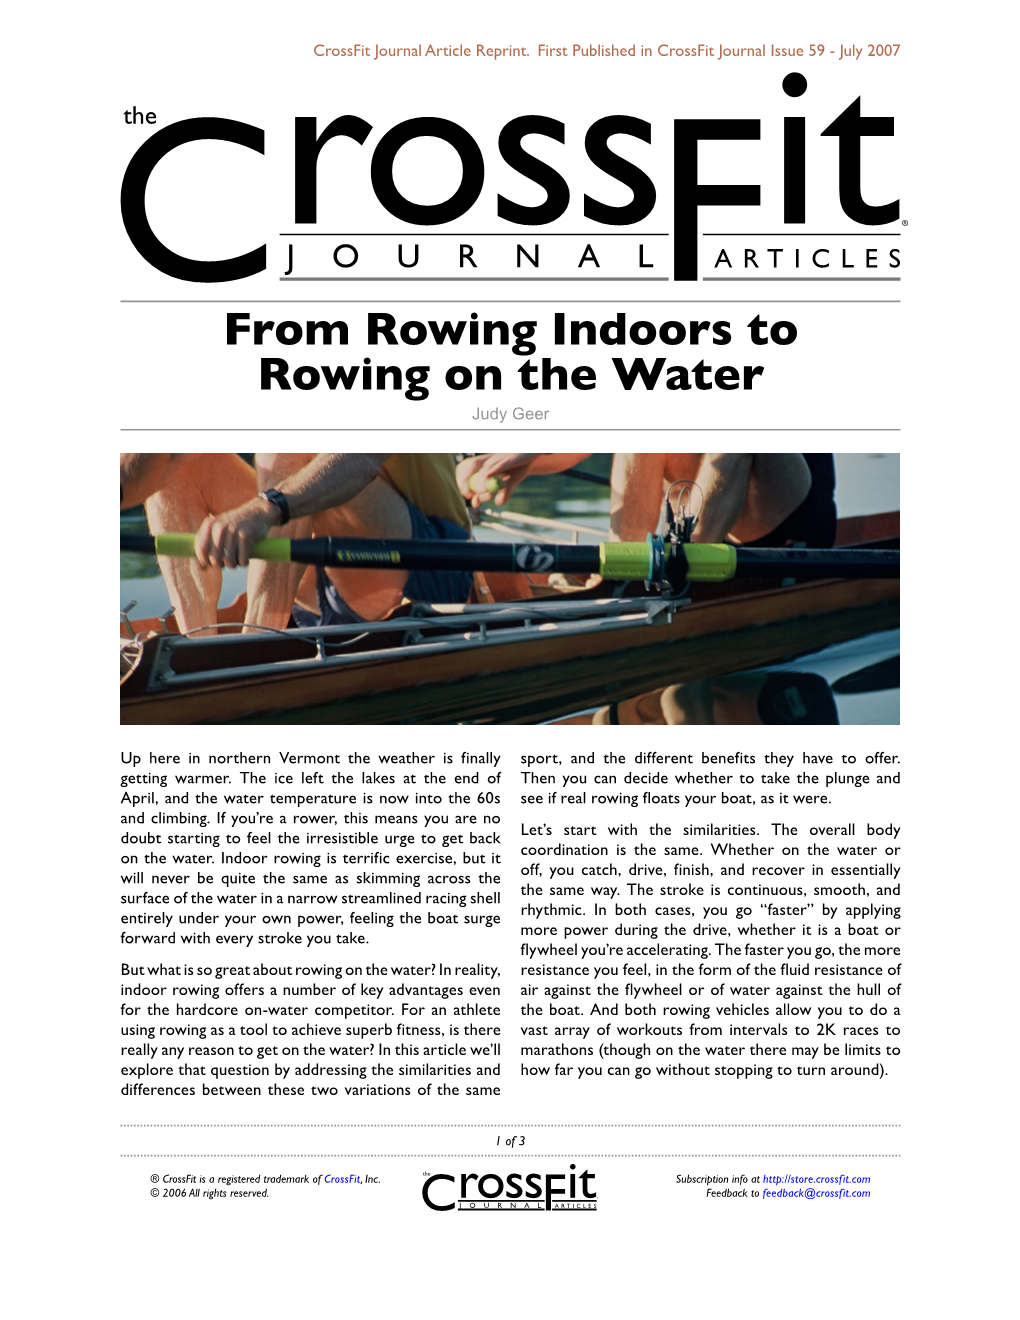 From Rowing Indoors to Rowing on the Water Judy Geer